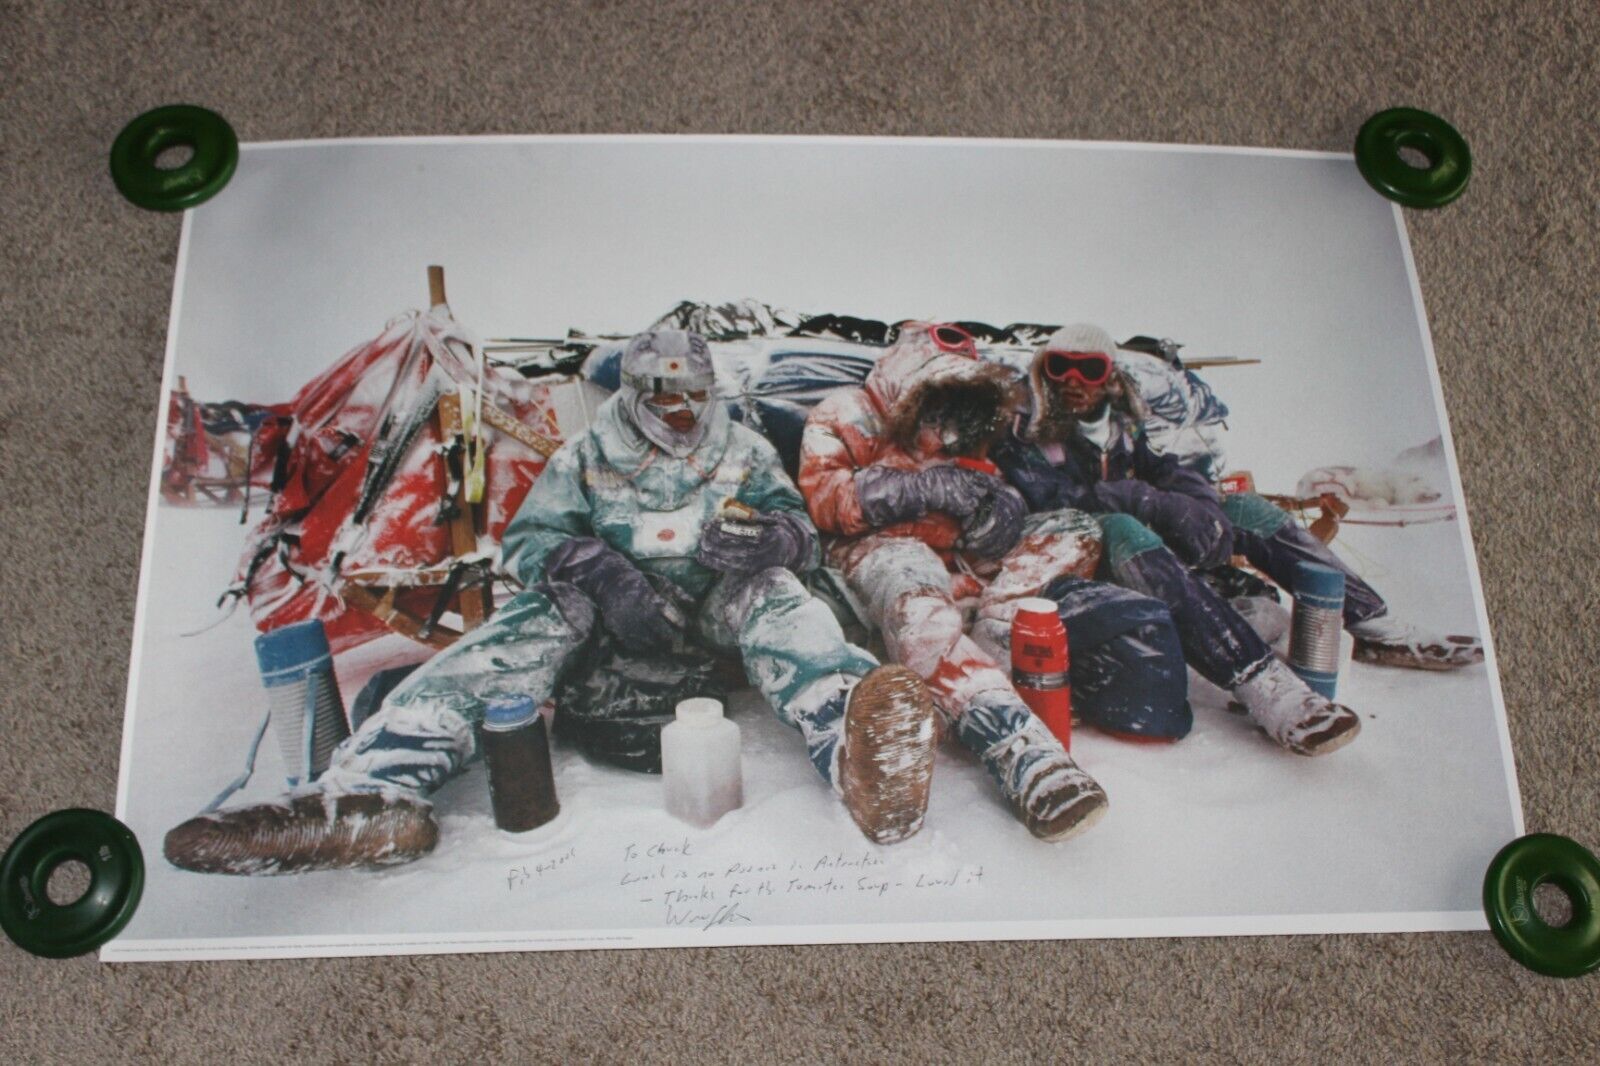 1990 Trans Antarctica Expedition Photo Print Signed Will Steger Dogsled 36 X 24